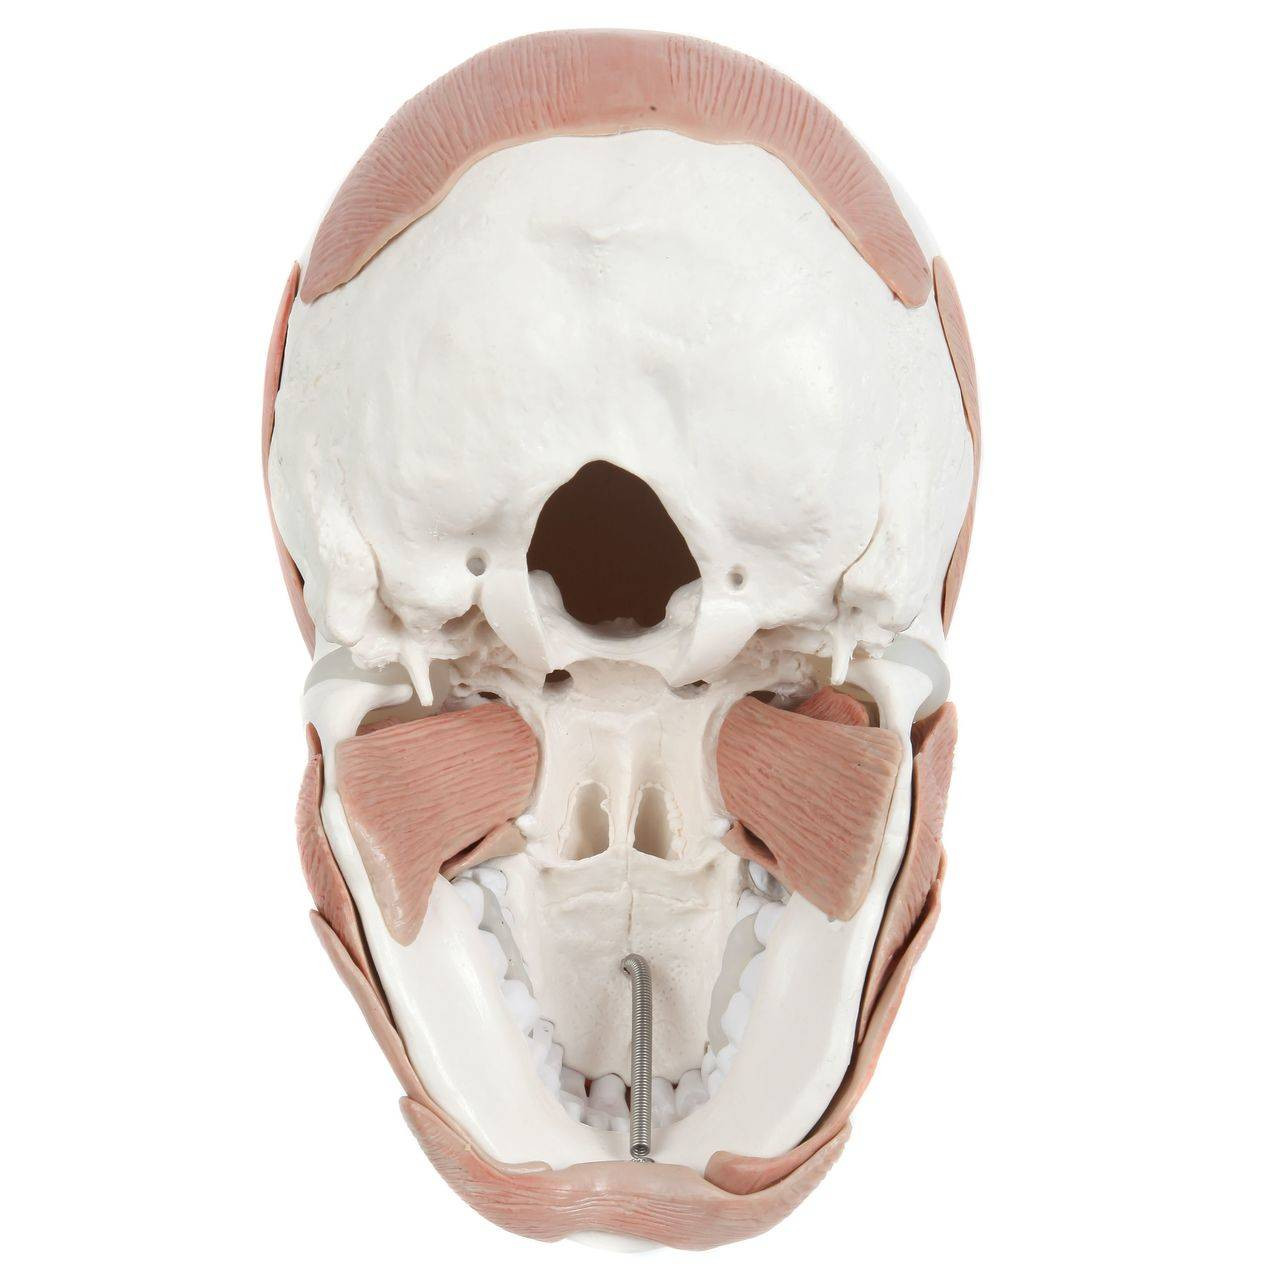 Axis Scientific Life-Size Human Skull with Removable Muscles Anatomy Model